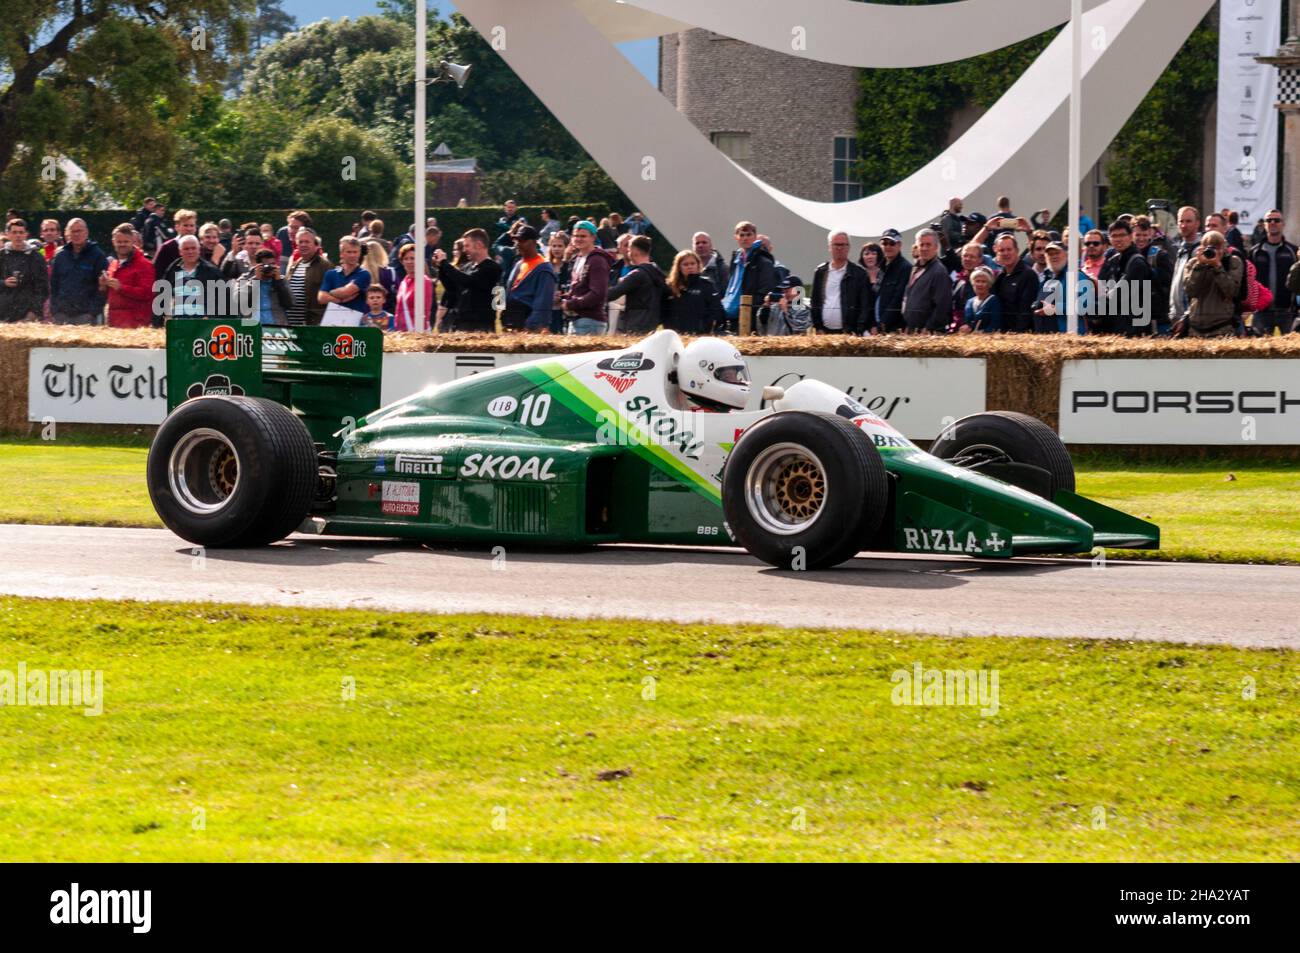 1985 RAM 03 Formula 1, Grand Prix, racing car driving up the hill climb  track at the Goodwood Festival of Speed motoring event in 2016. RAM Hart  Stock Photo - Alamy